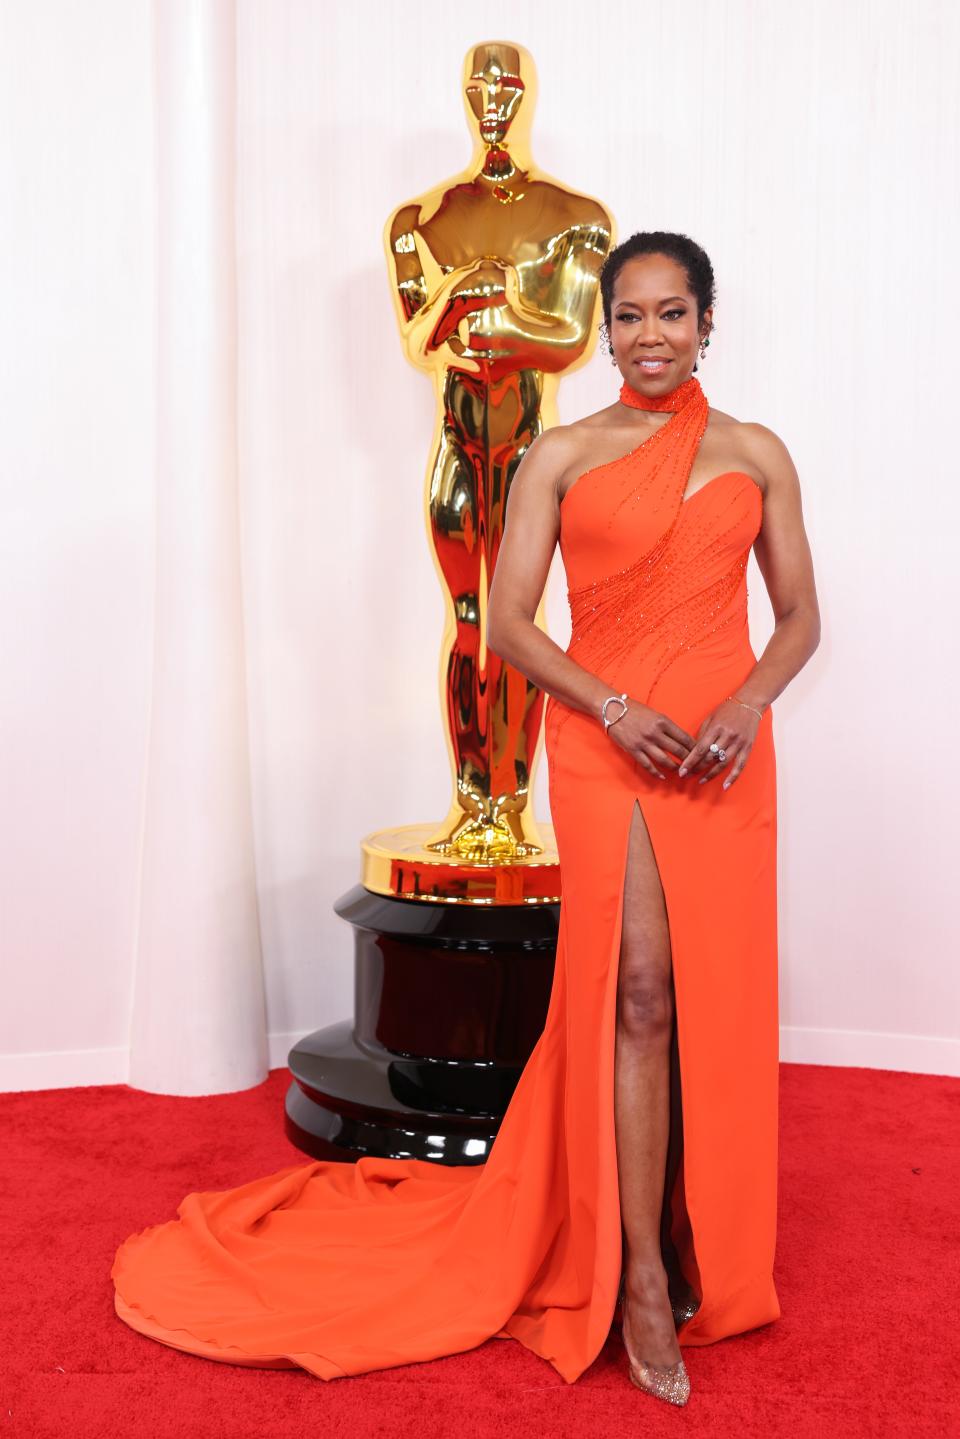 Image may contain: Regina King, Fashion, Adult, Person, Accessories, Jewelry, Ring, Bracelet, Clothing, and Footwear